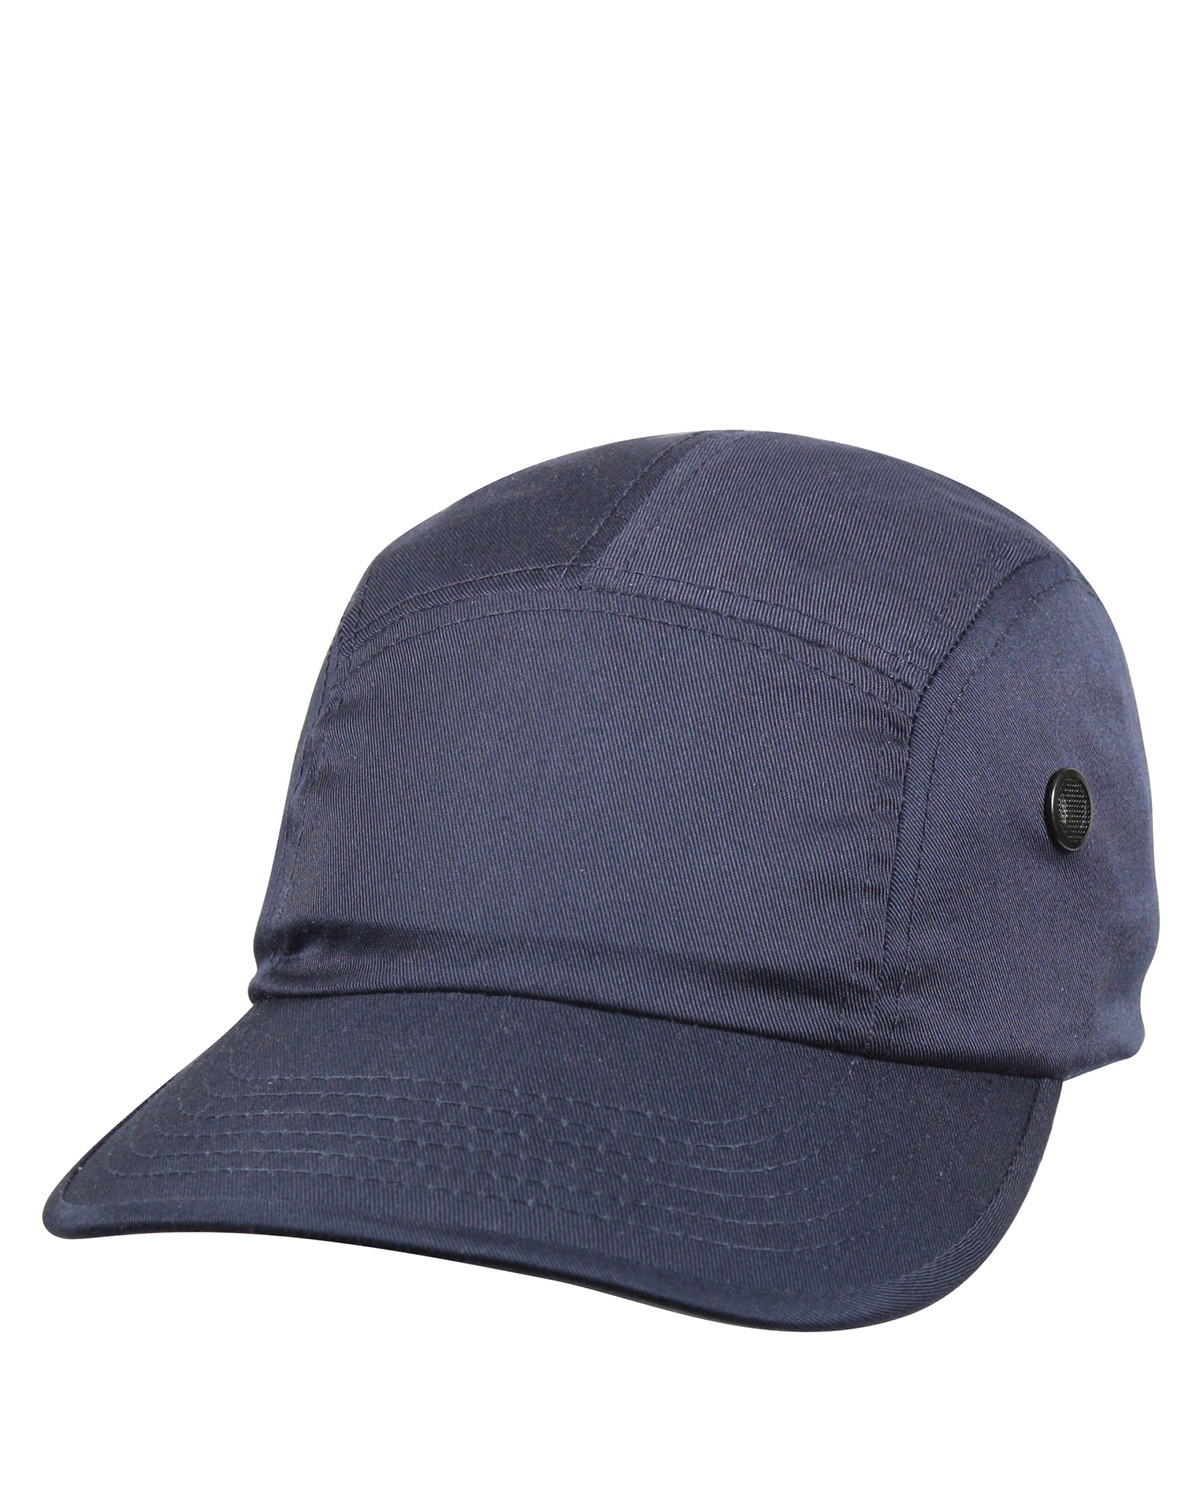 9: Rothco 5 Panel Military Street Cap (Navy, One Size)